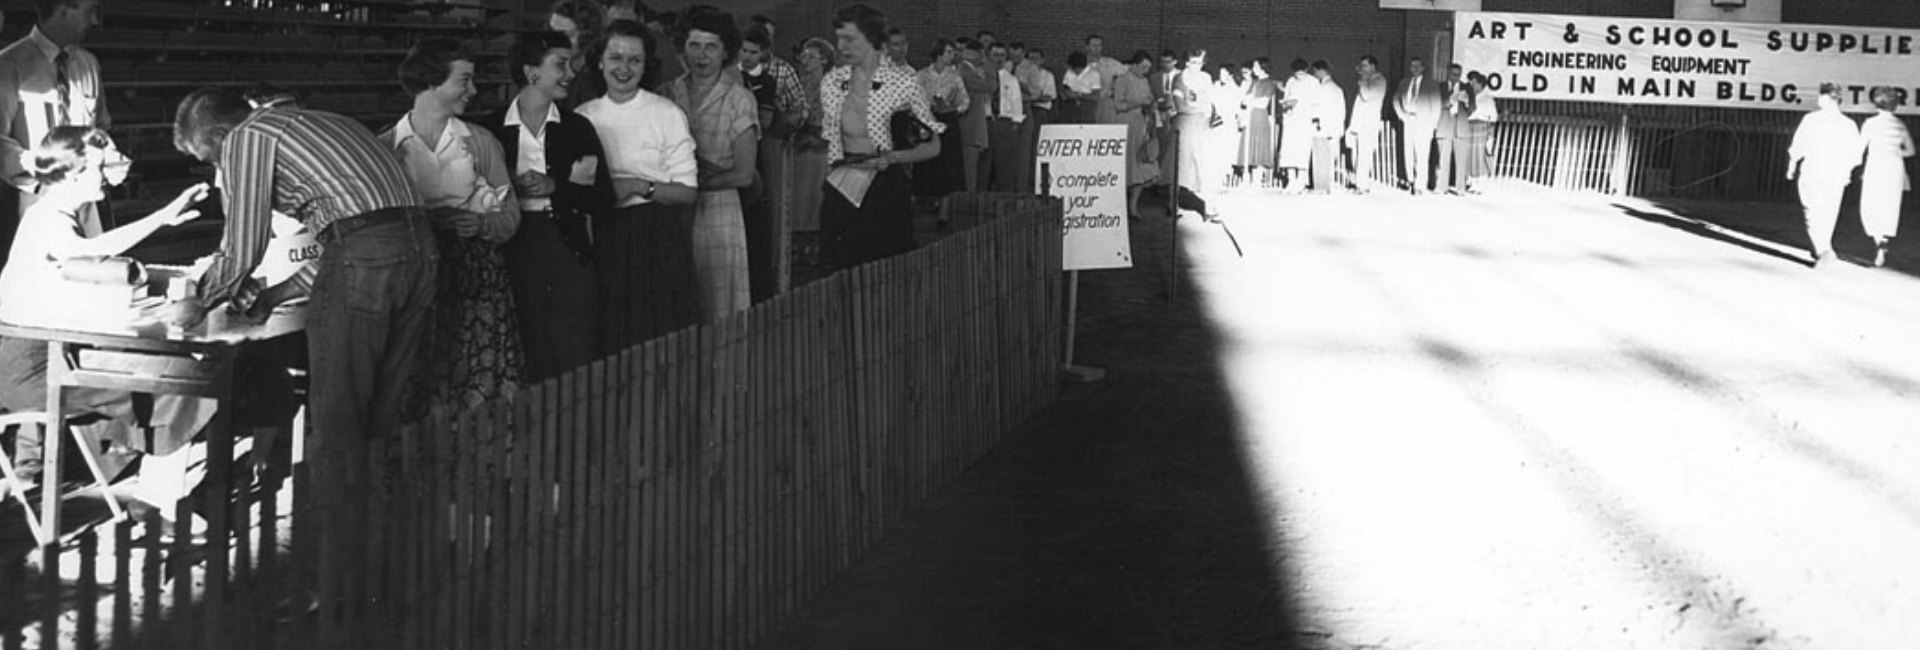 Students registering for classes at Sapp Fieldhouse in 1955